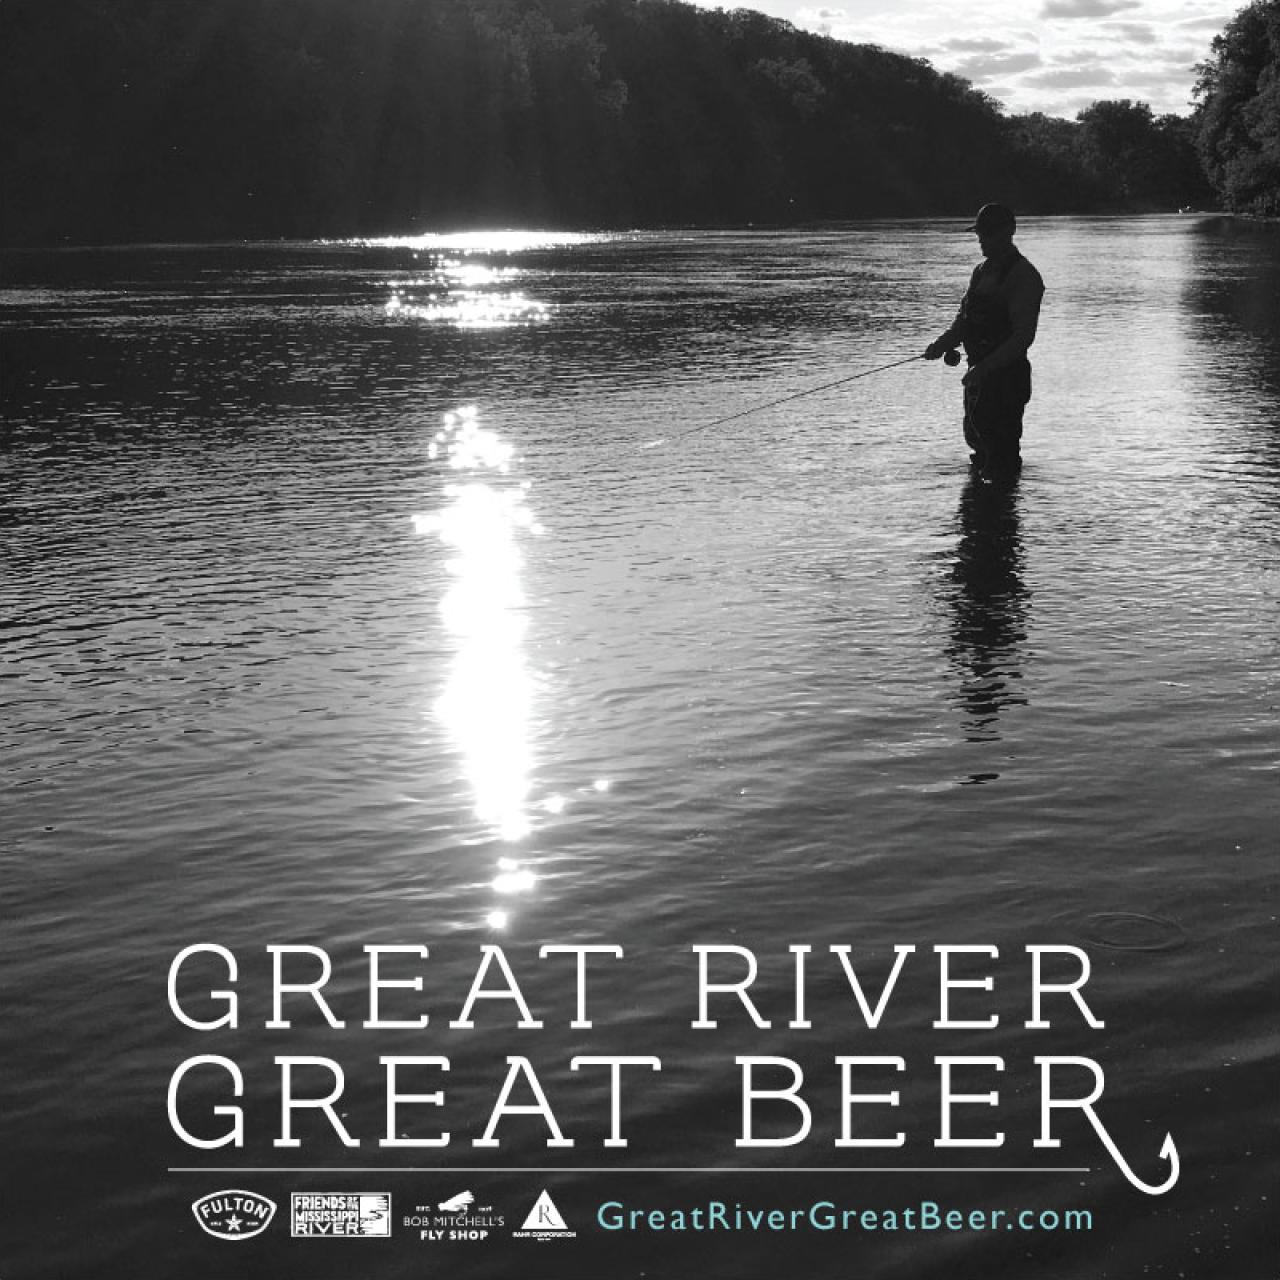 Great River. Great Beer.